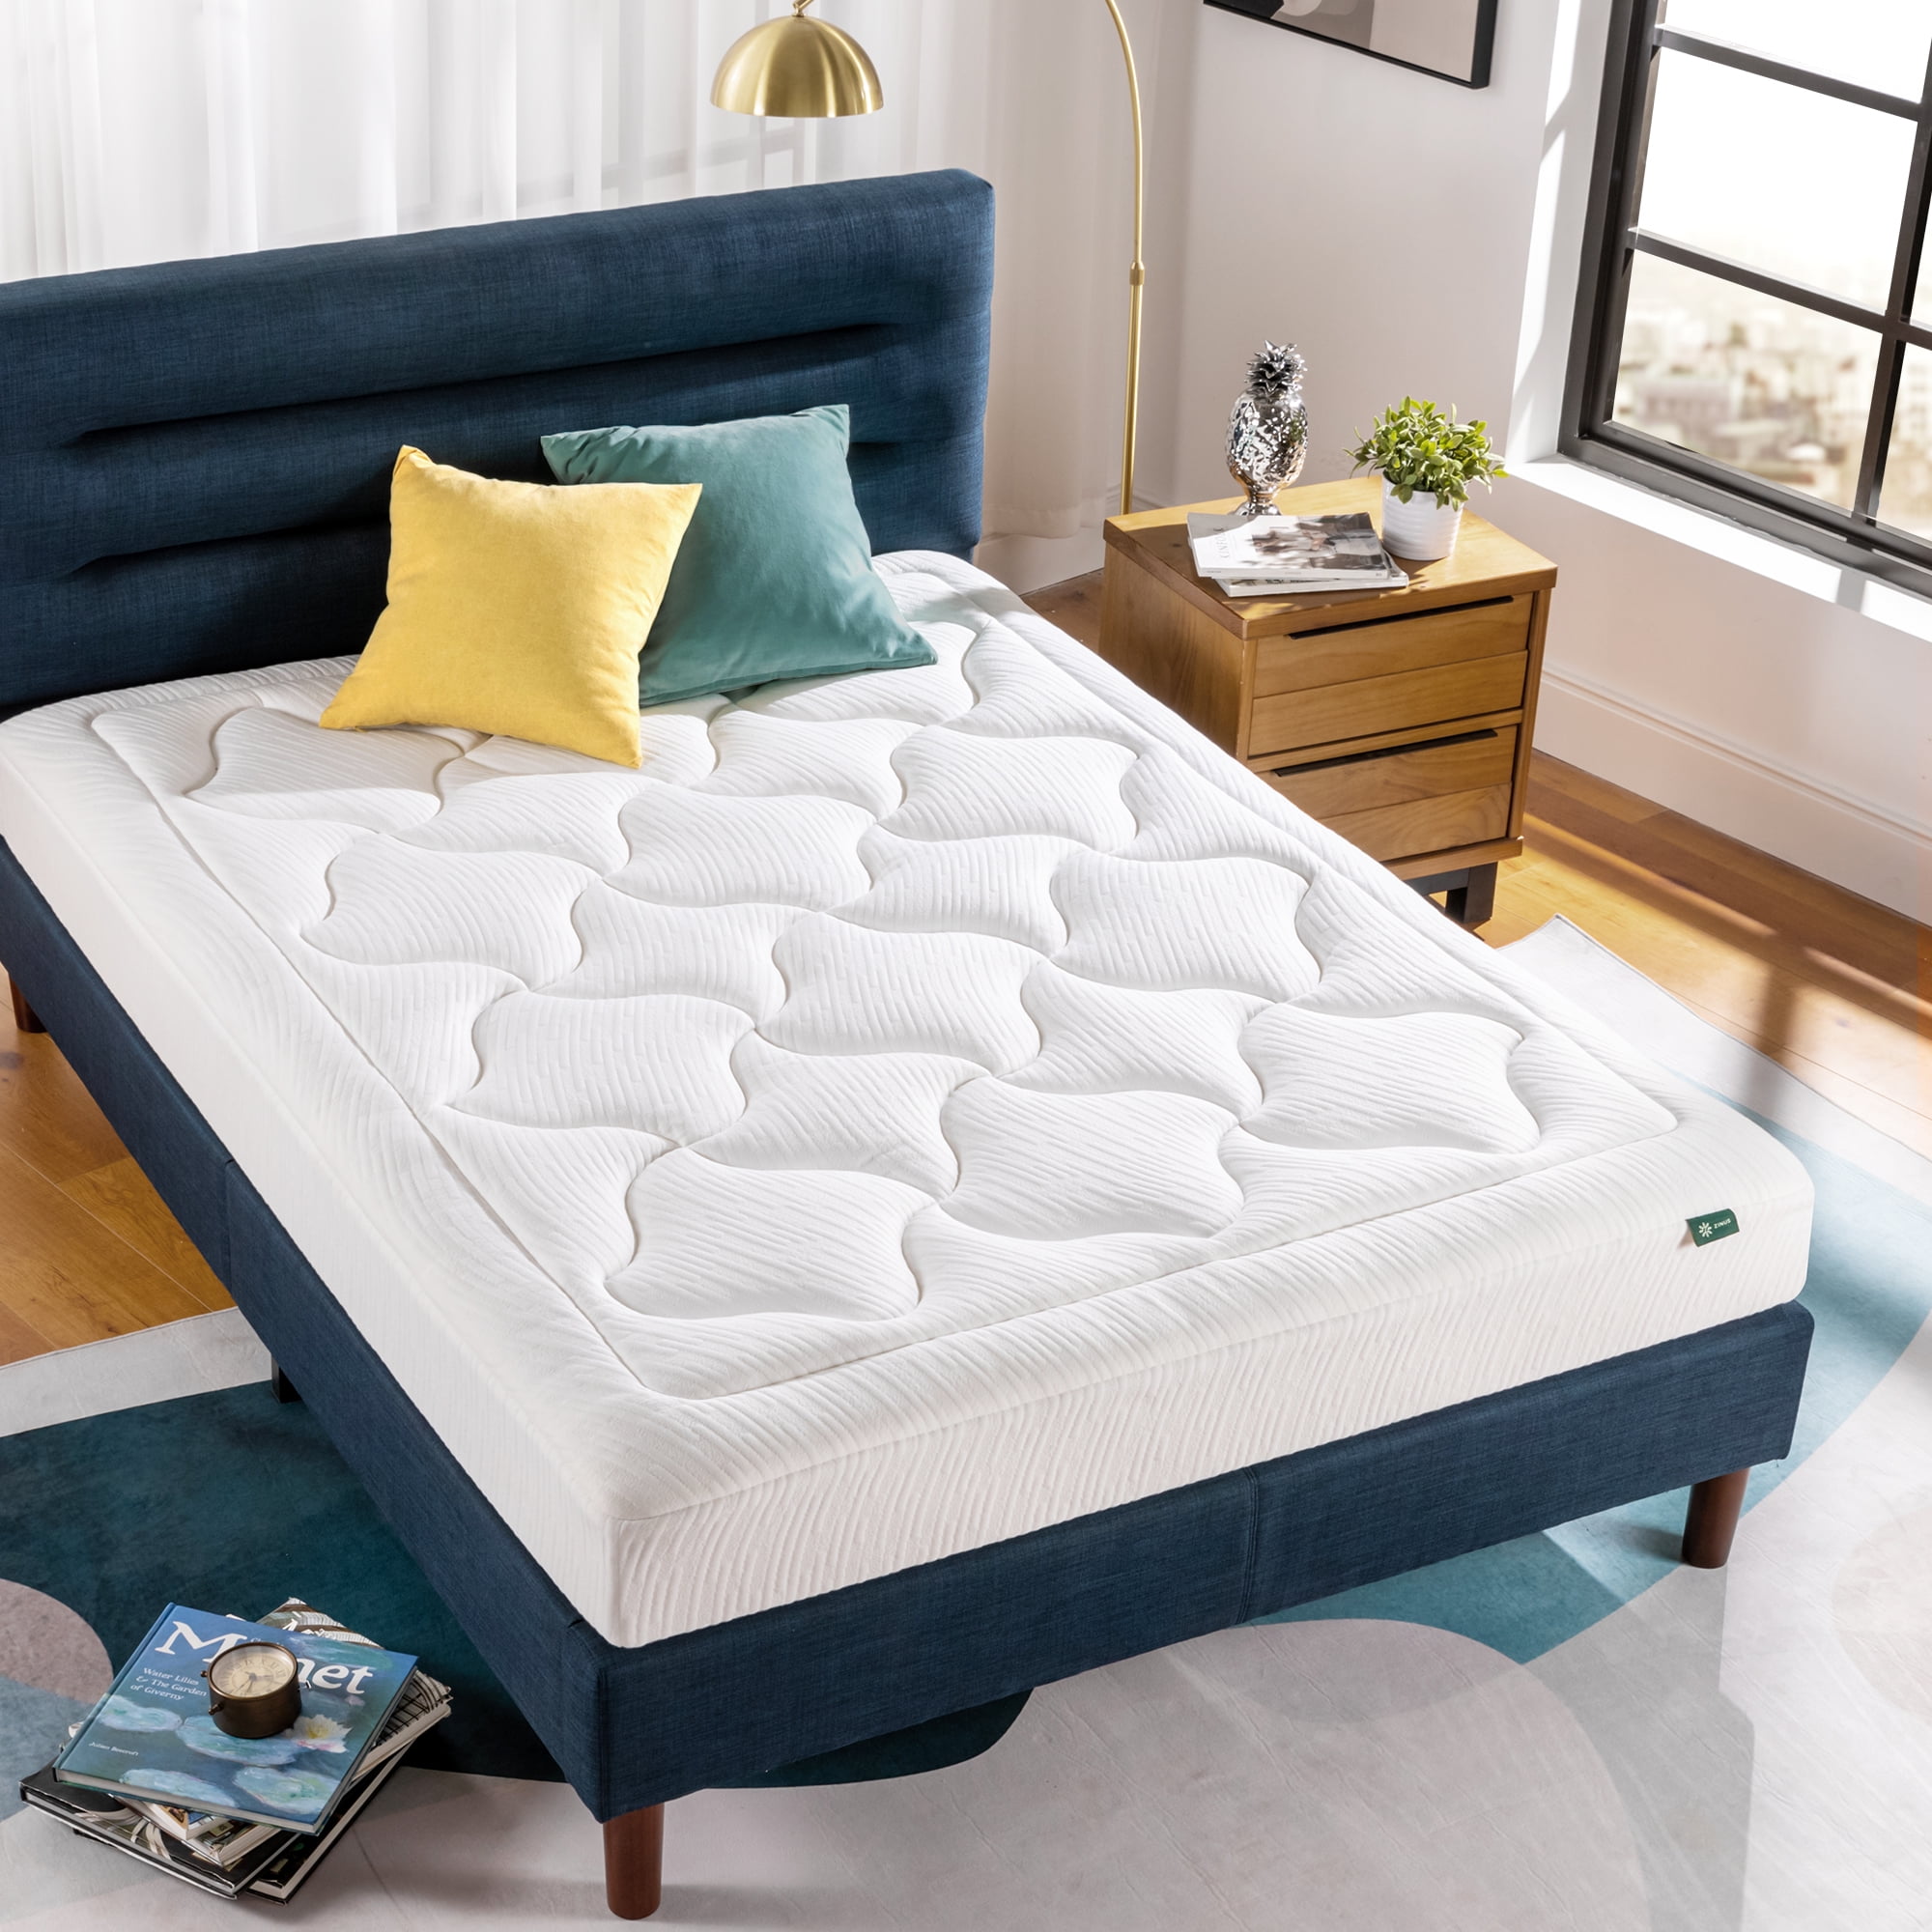 Details about   Memory Foam Bed Mattress Extra Thick Ventilated Breathable Comfort Soft 10-Inch 